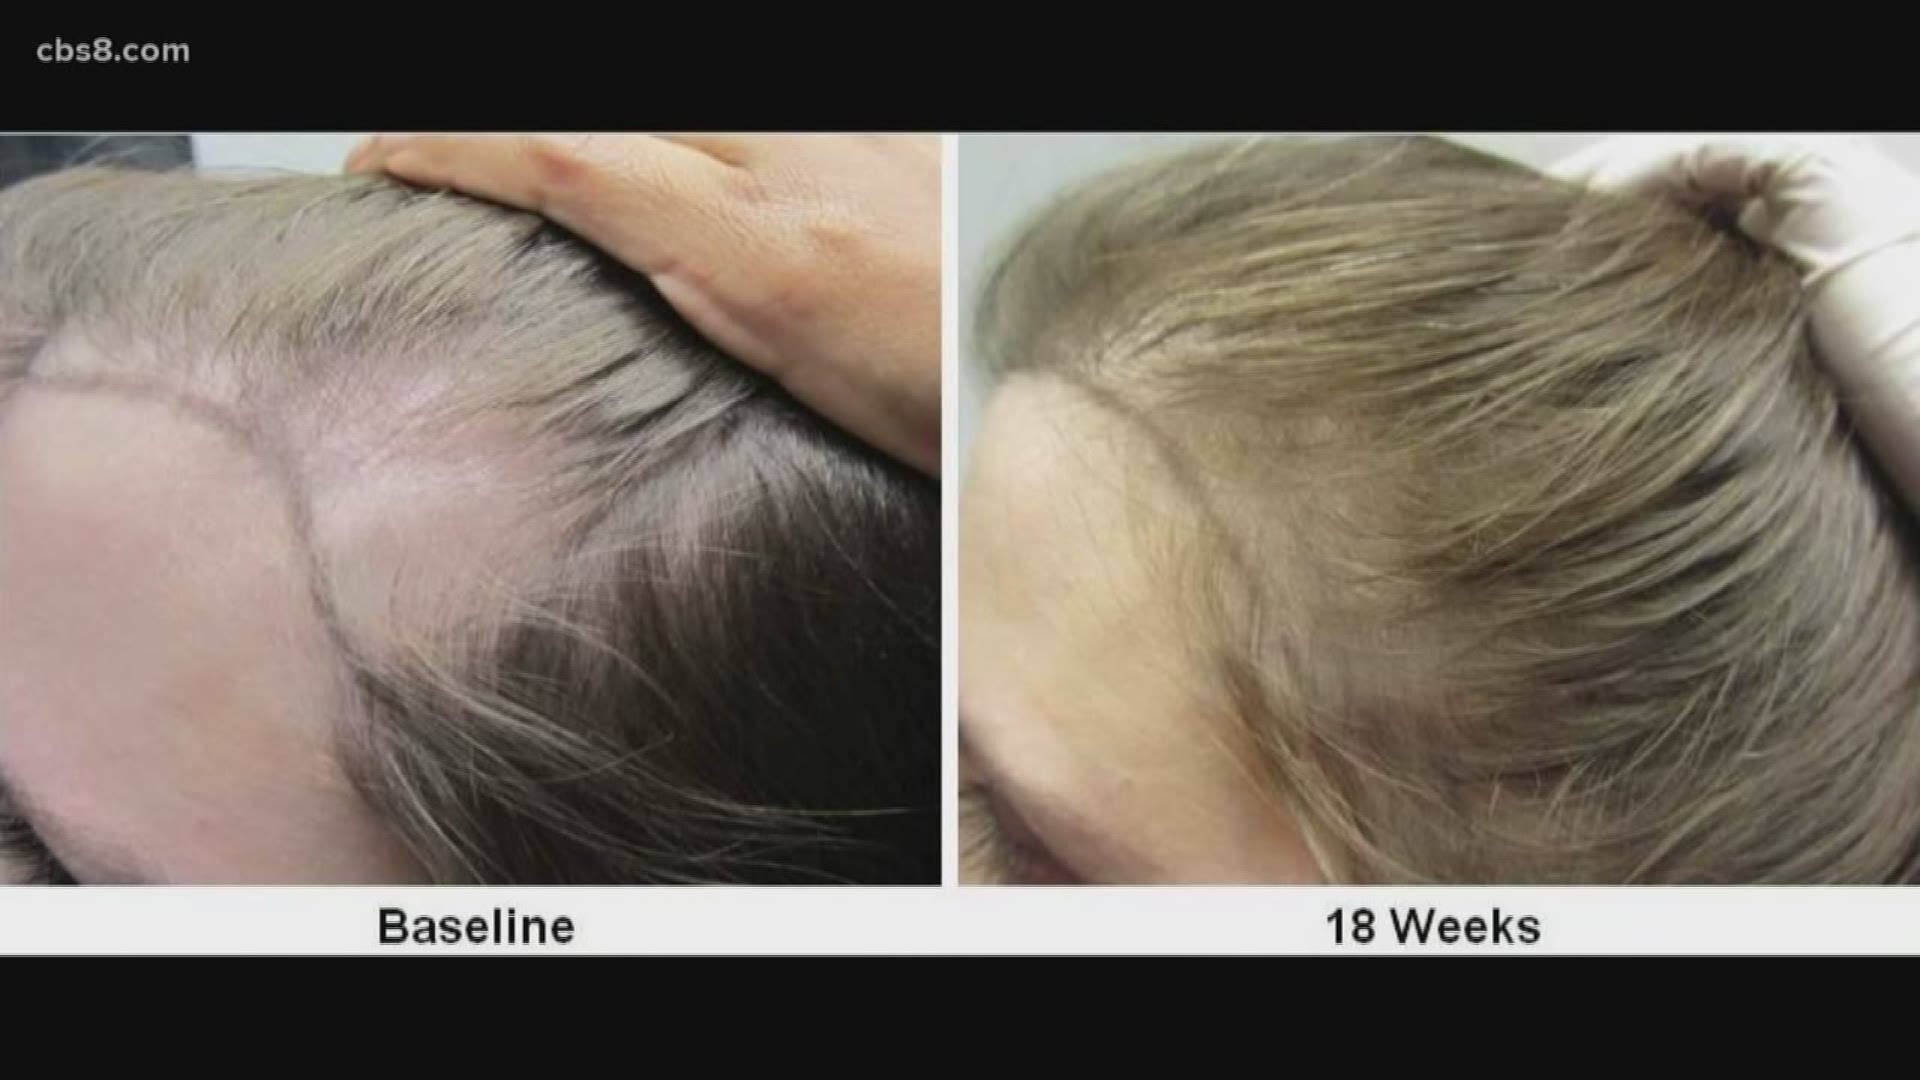 San Diego biotech company testing stem-cell cure for baldness 